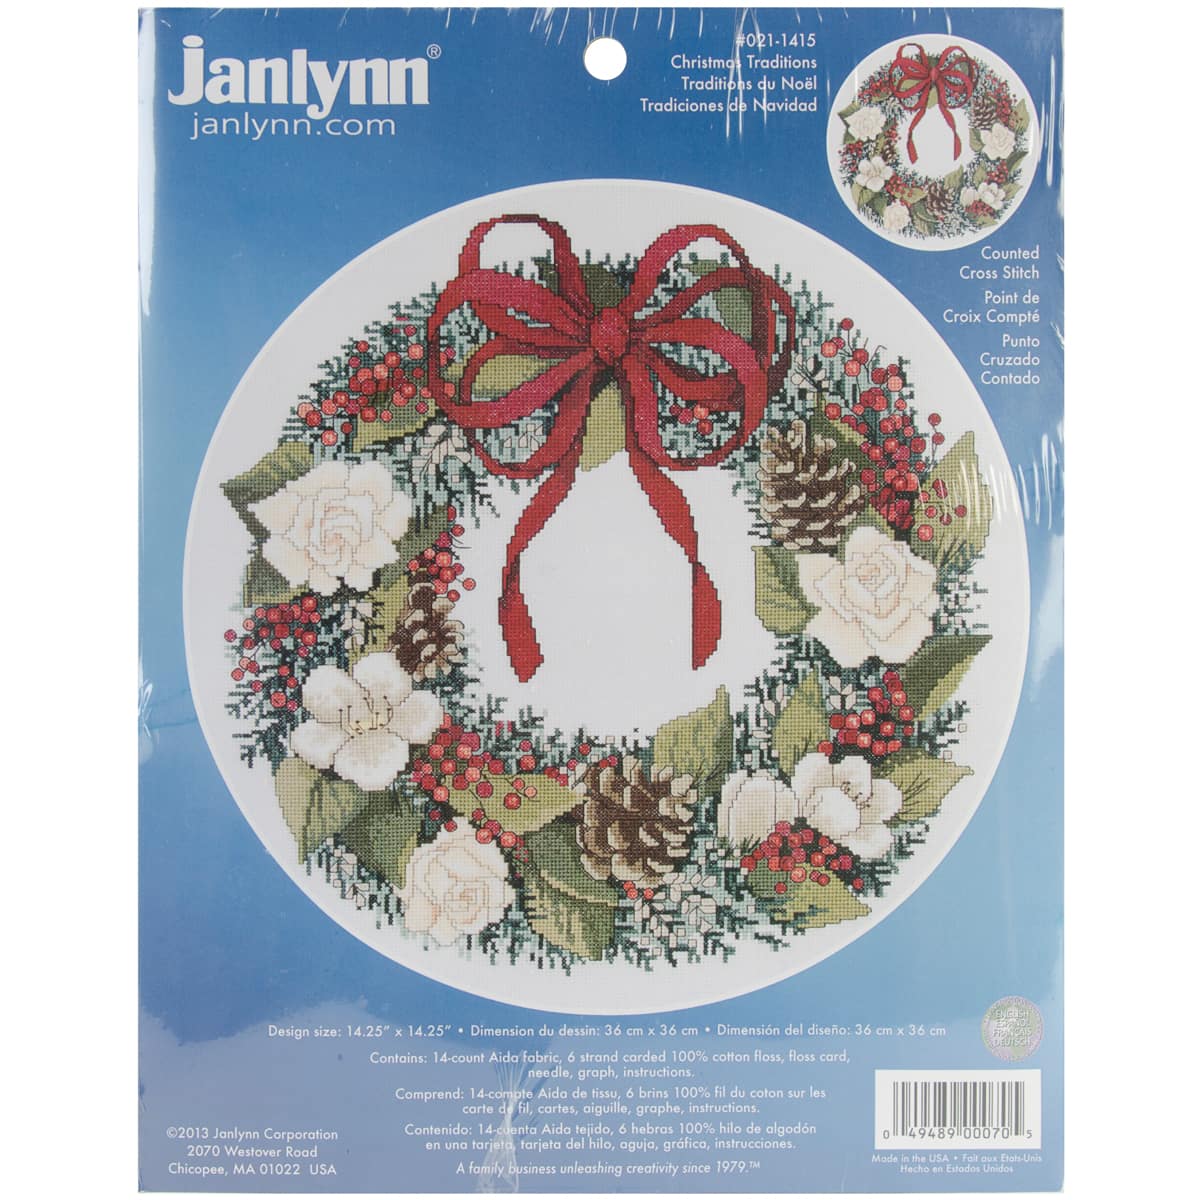 Janlynn Counted Cross Stitch Kit 15.25 inch x14.25 inch -Christmas Traditions (14 Count)